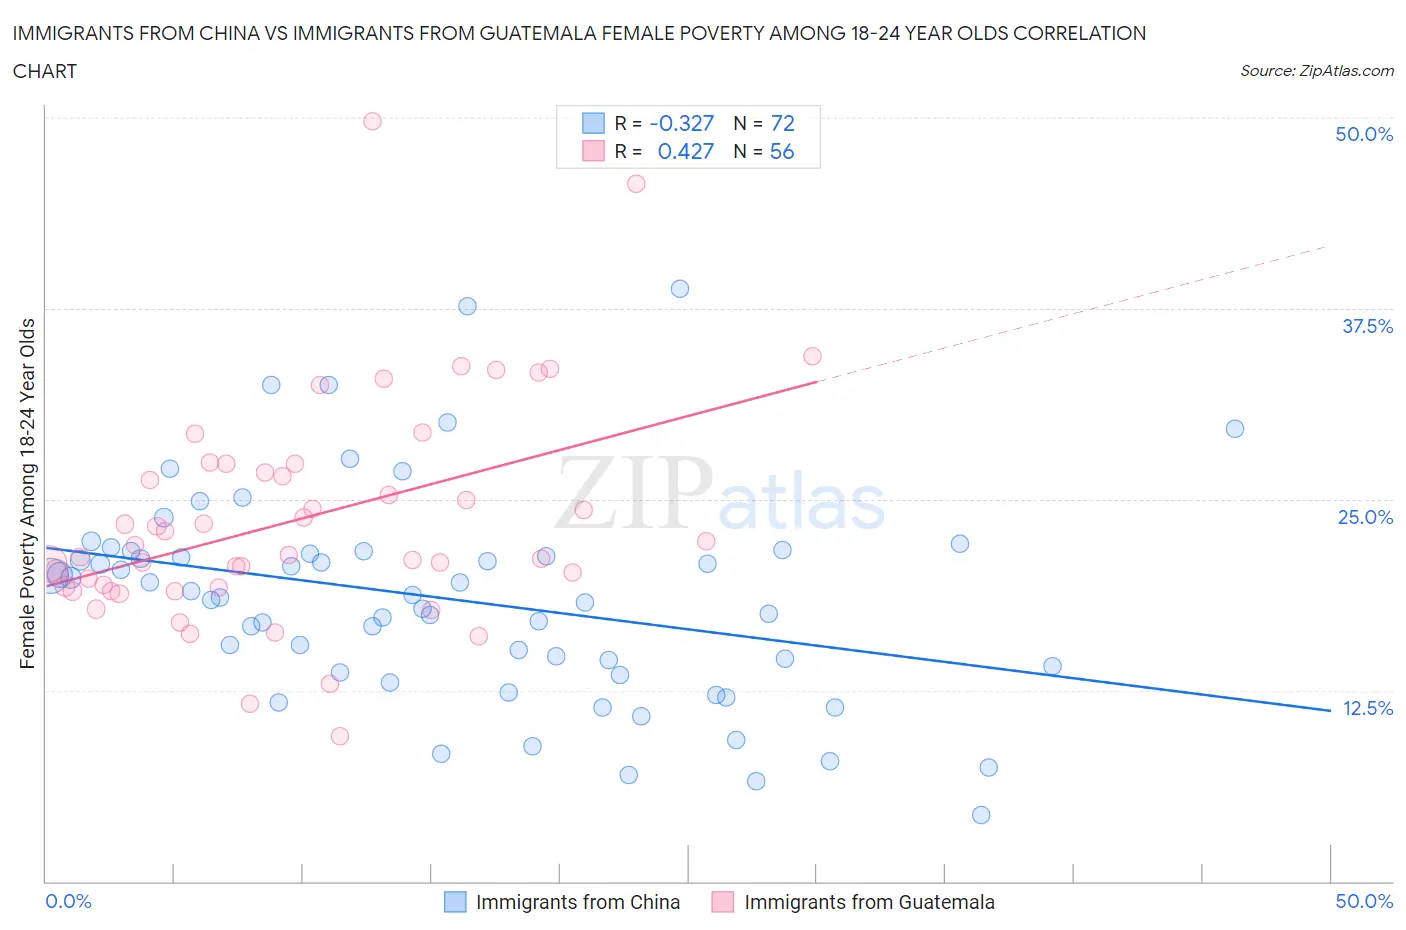 Immigrants from China vs Immigrants from Guatemala Female Poverty Among 18-24 Year Olds